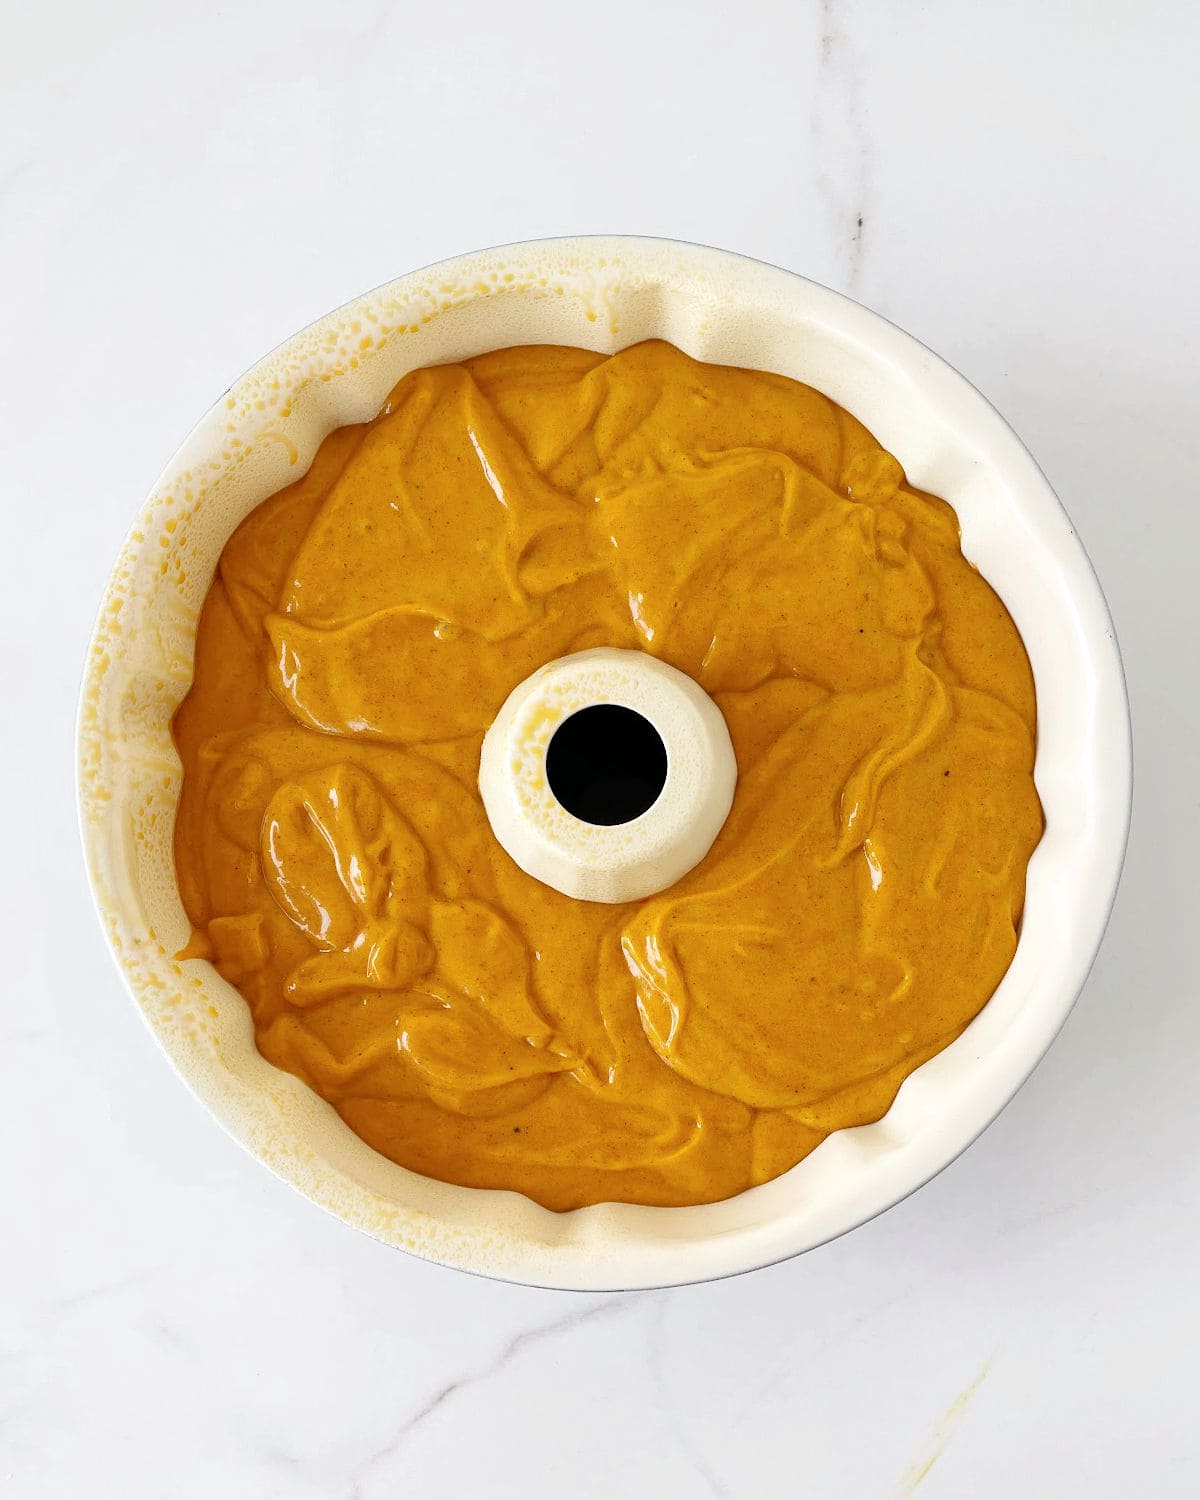 Pumpkin cake batter in a bundt pan on a white marbled surface.